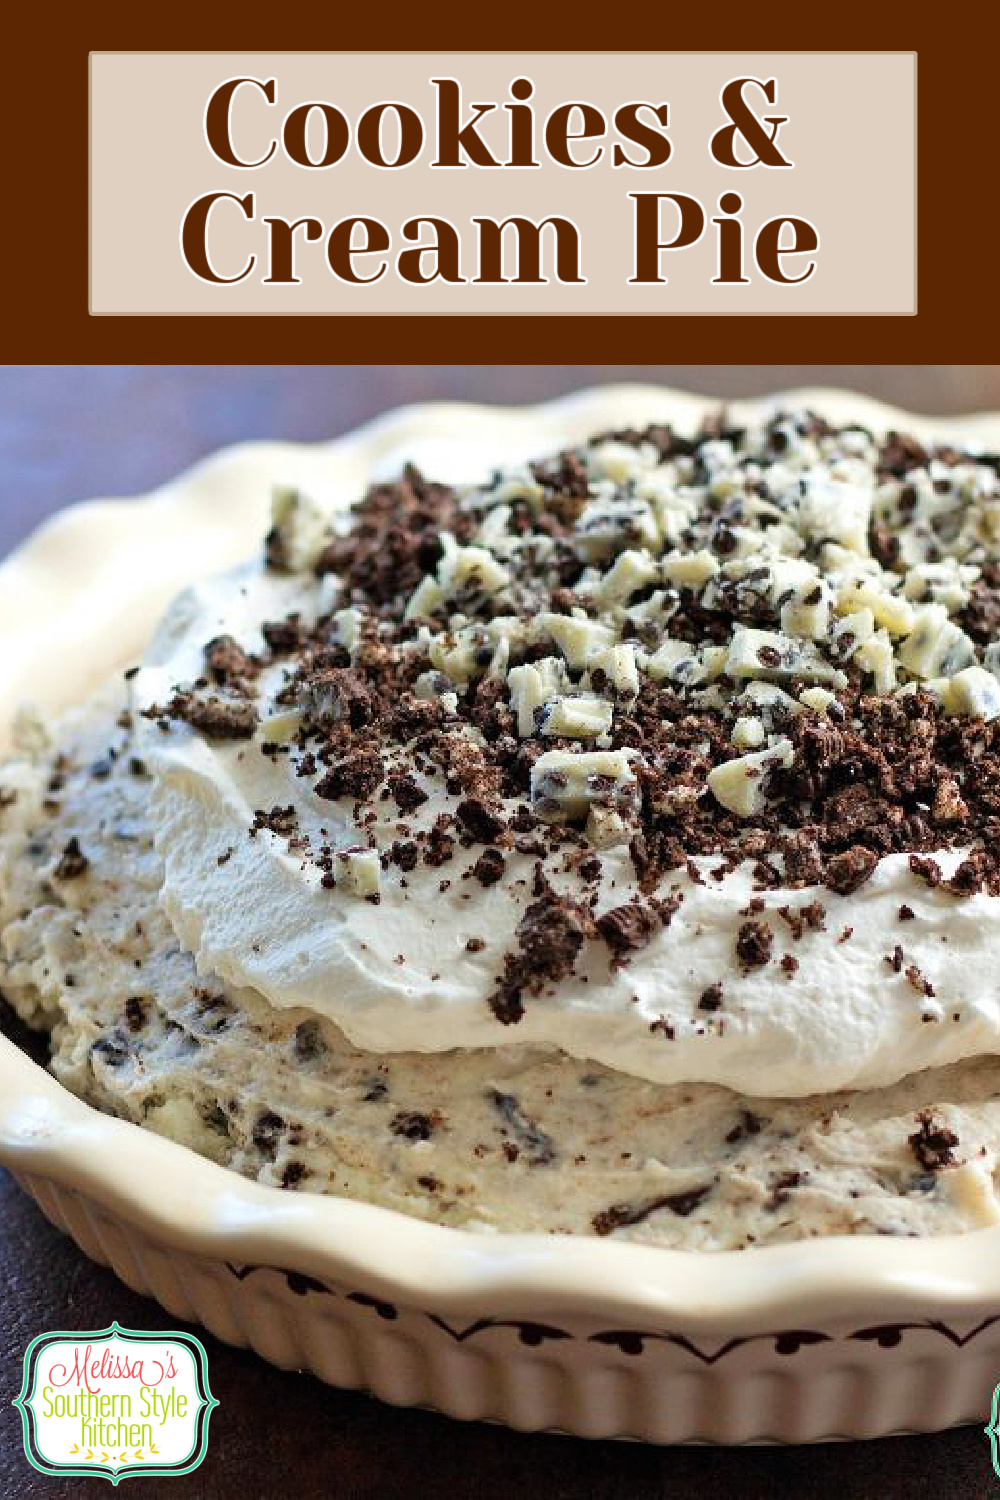 This easy Cookies and Cream Pie makes the perfect sweet ending for your meal #cookiesandcream #Oreos #pierecipes #cookiesandcreampie #southernrecipes #chocolate #whitechocolate #oreopie #desserts #dessertfoodrecipes